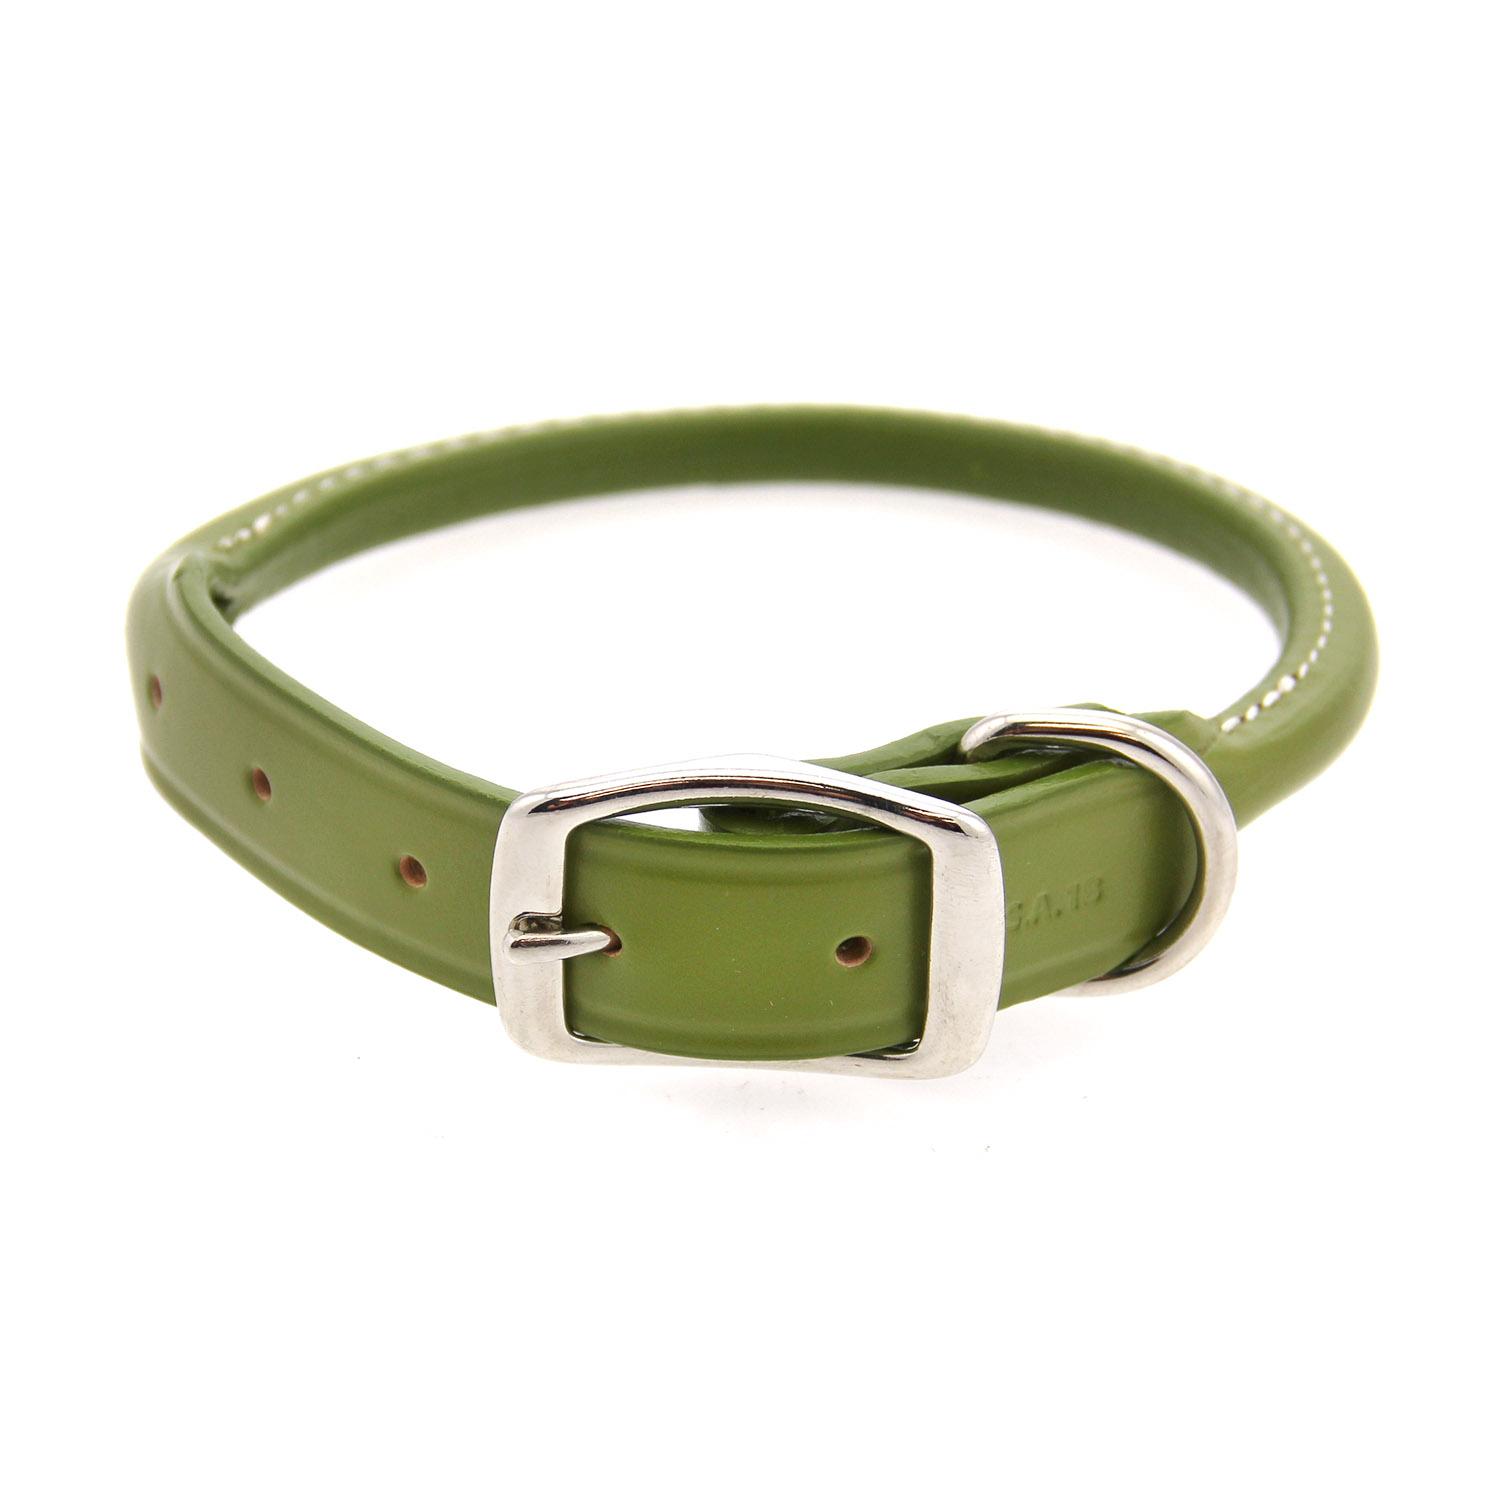 Round Leather Dog Collar by Auburn Leather - Green